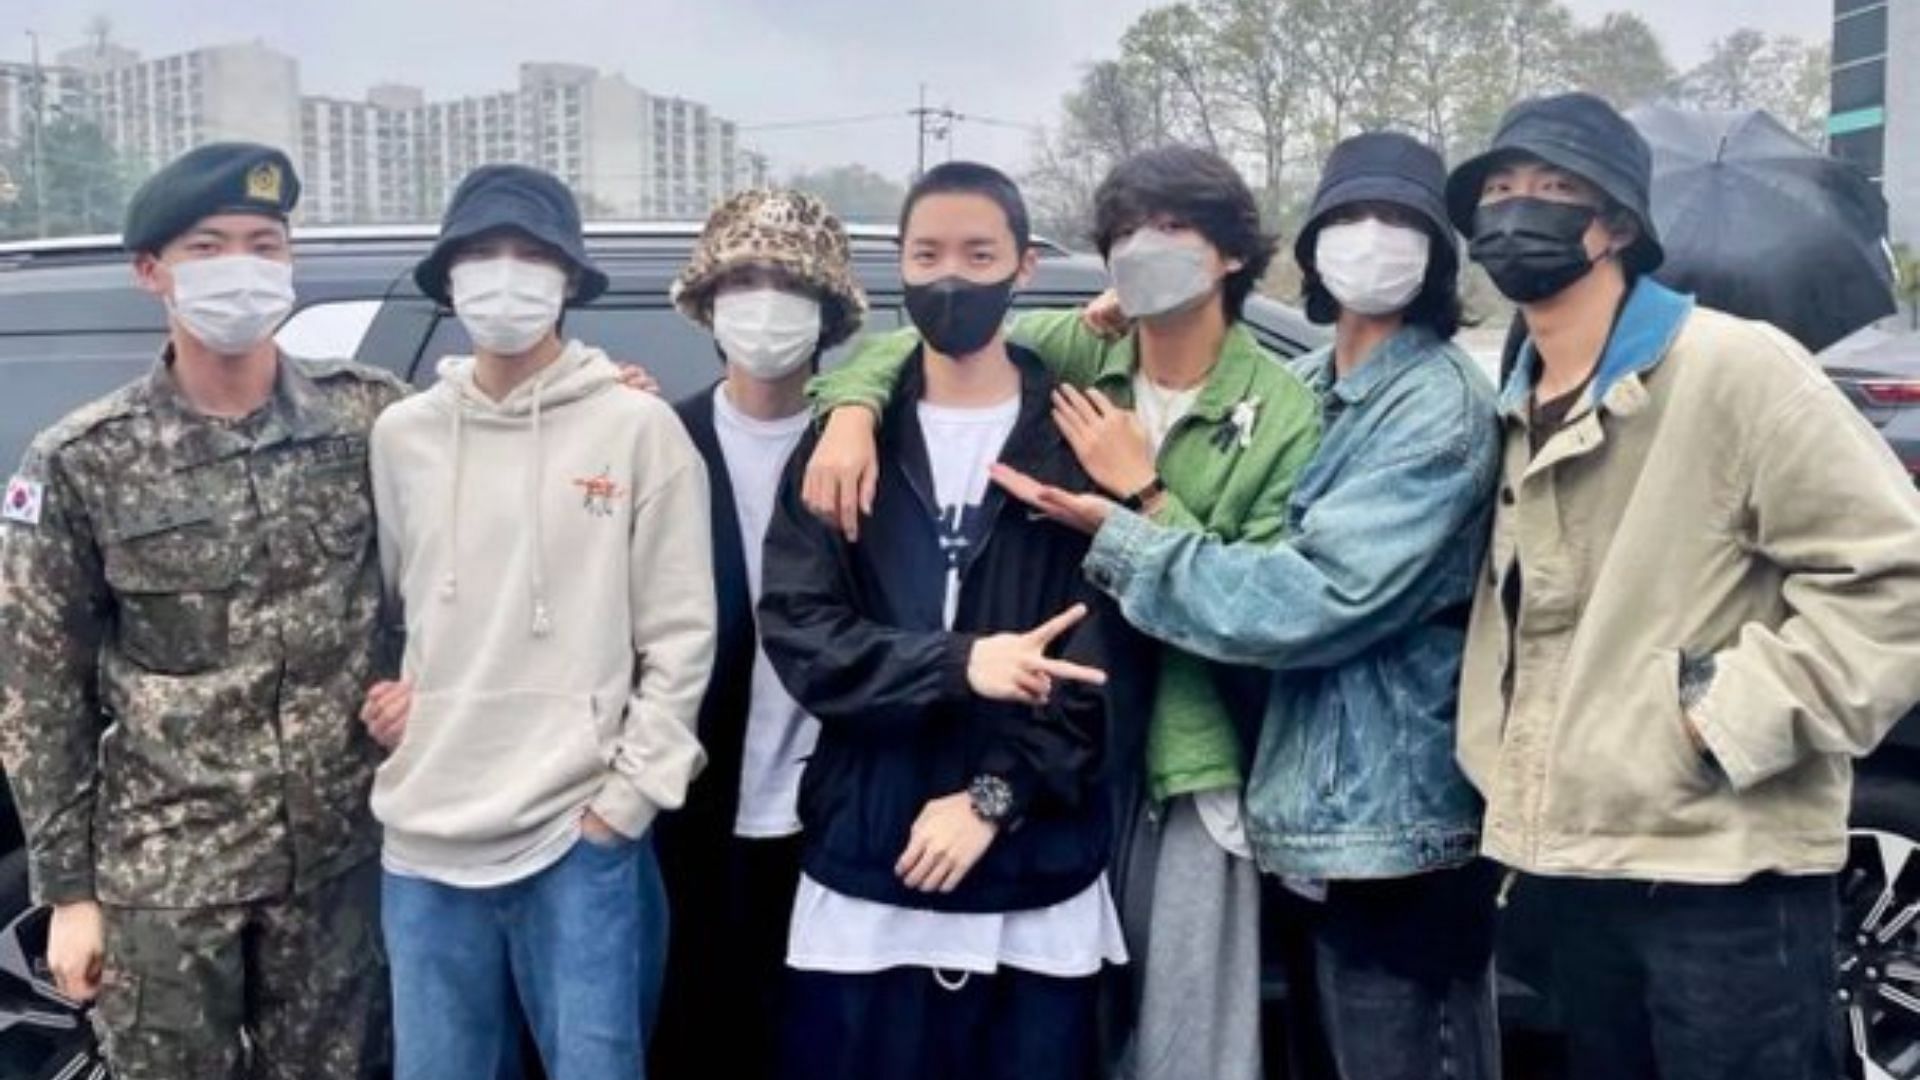 BTS members reunite to drop J-hope off at the military (Image via Twitter/@BTS_twt)